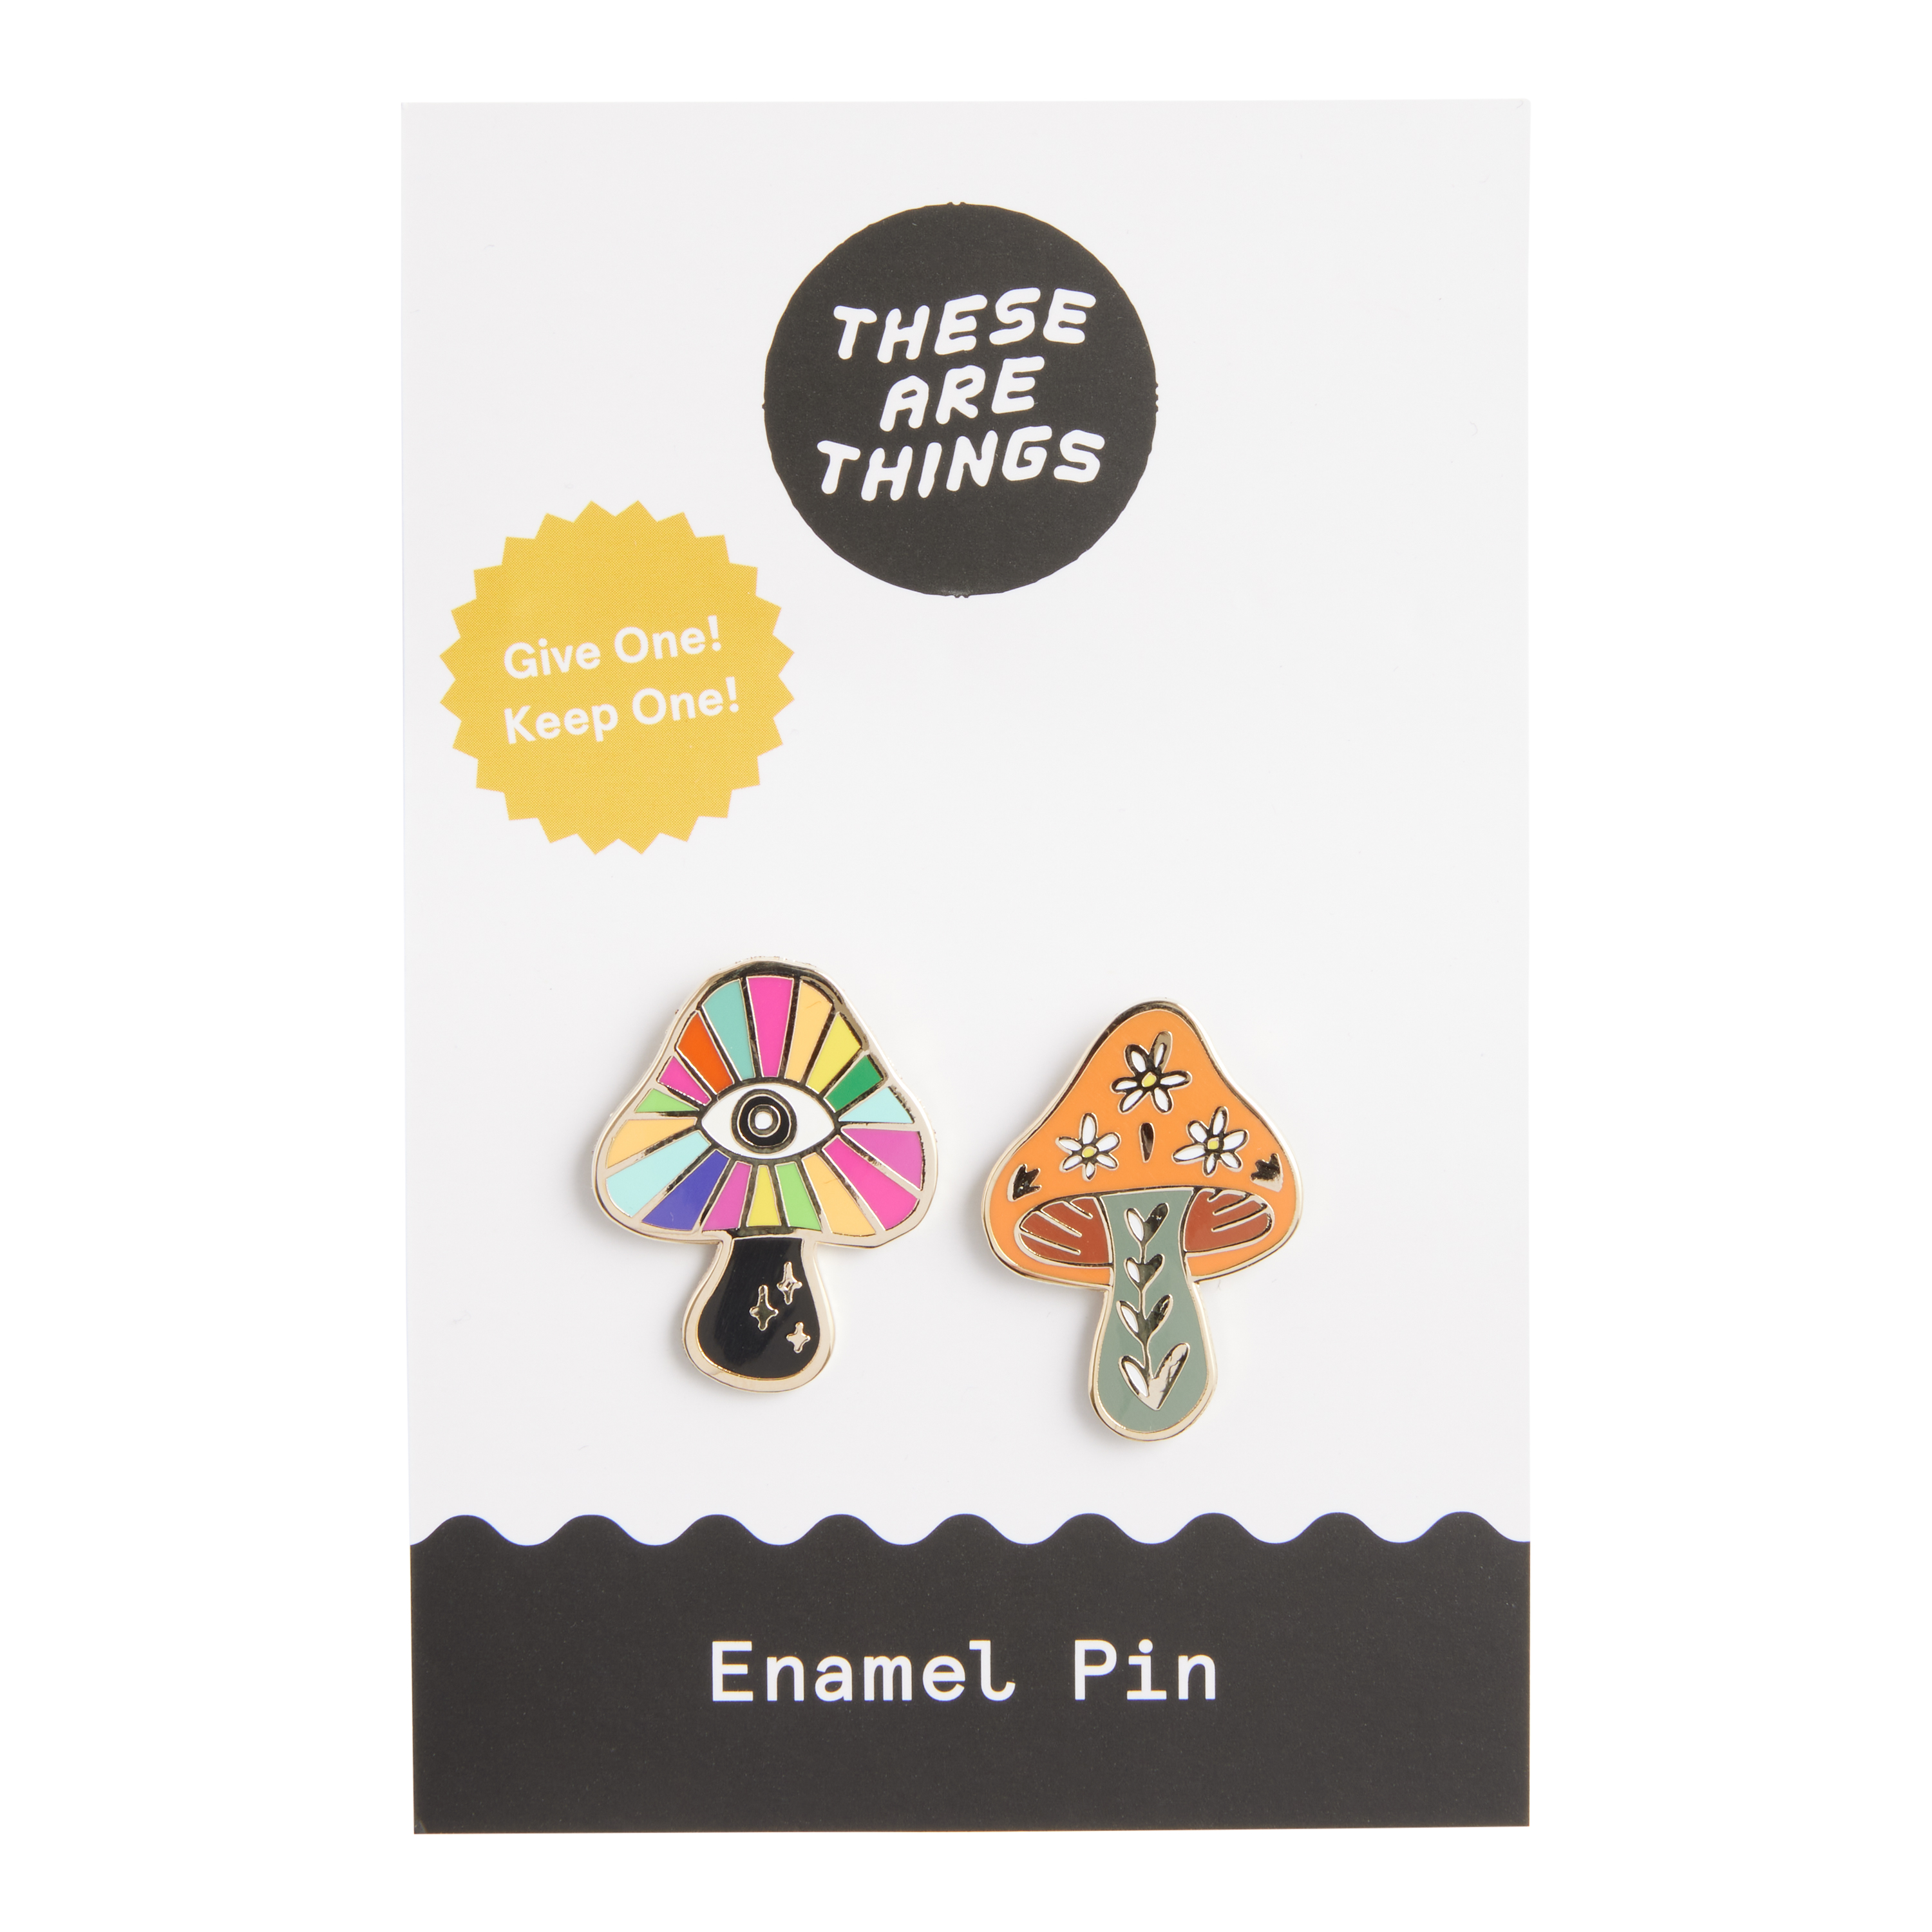 How To Package Enamel Pins To Sell + DIY Pin Packaging Board